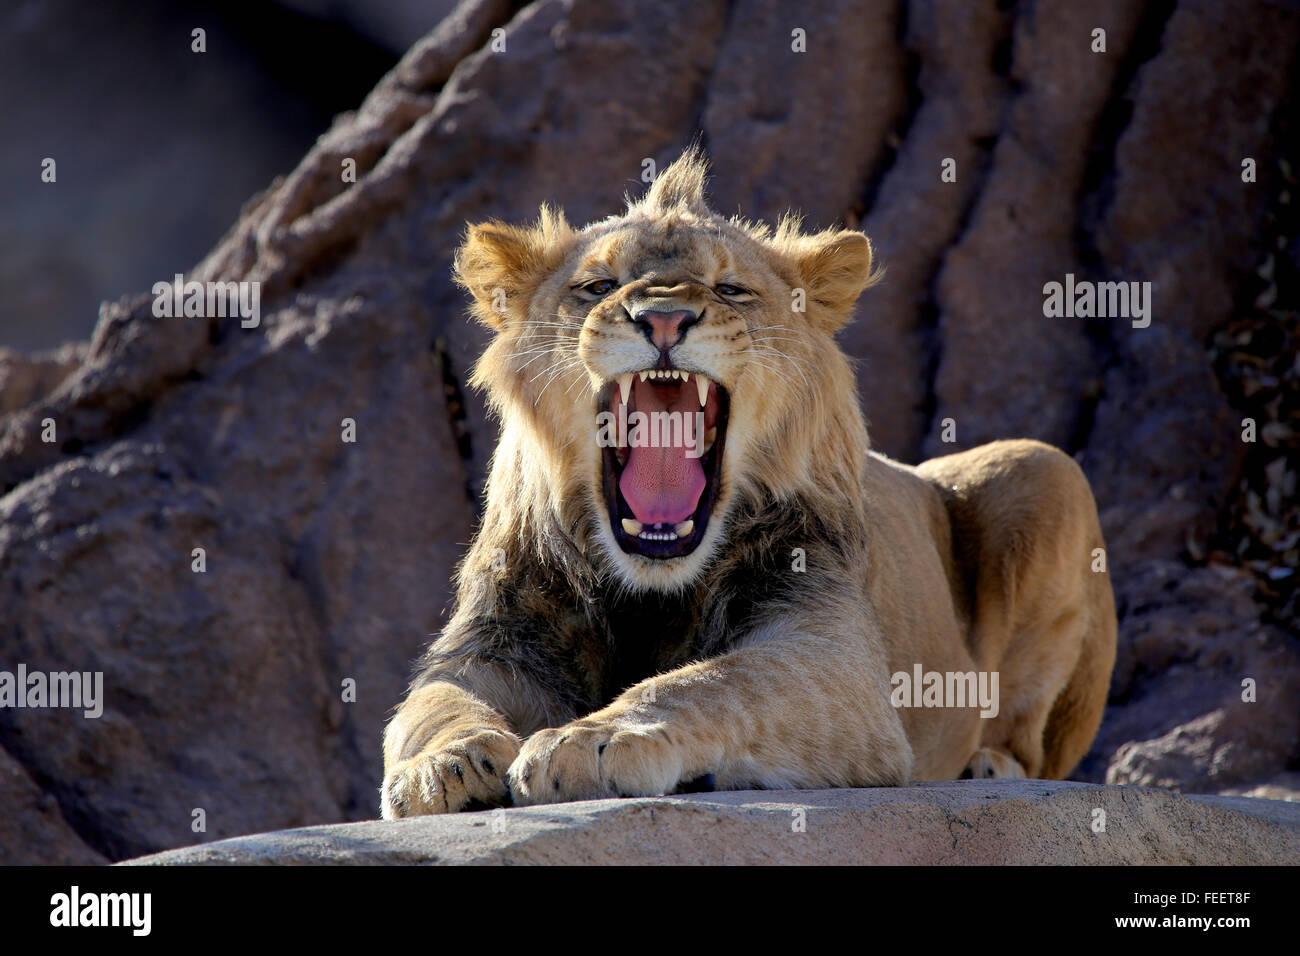 Young African Lion growling Stock Photo